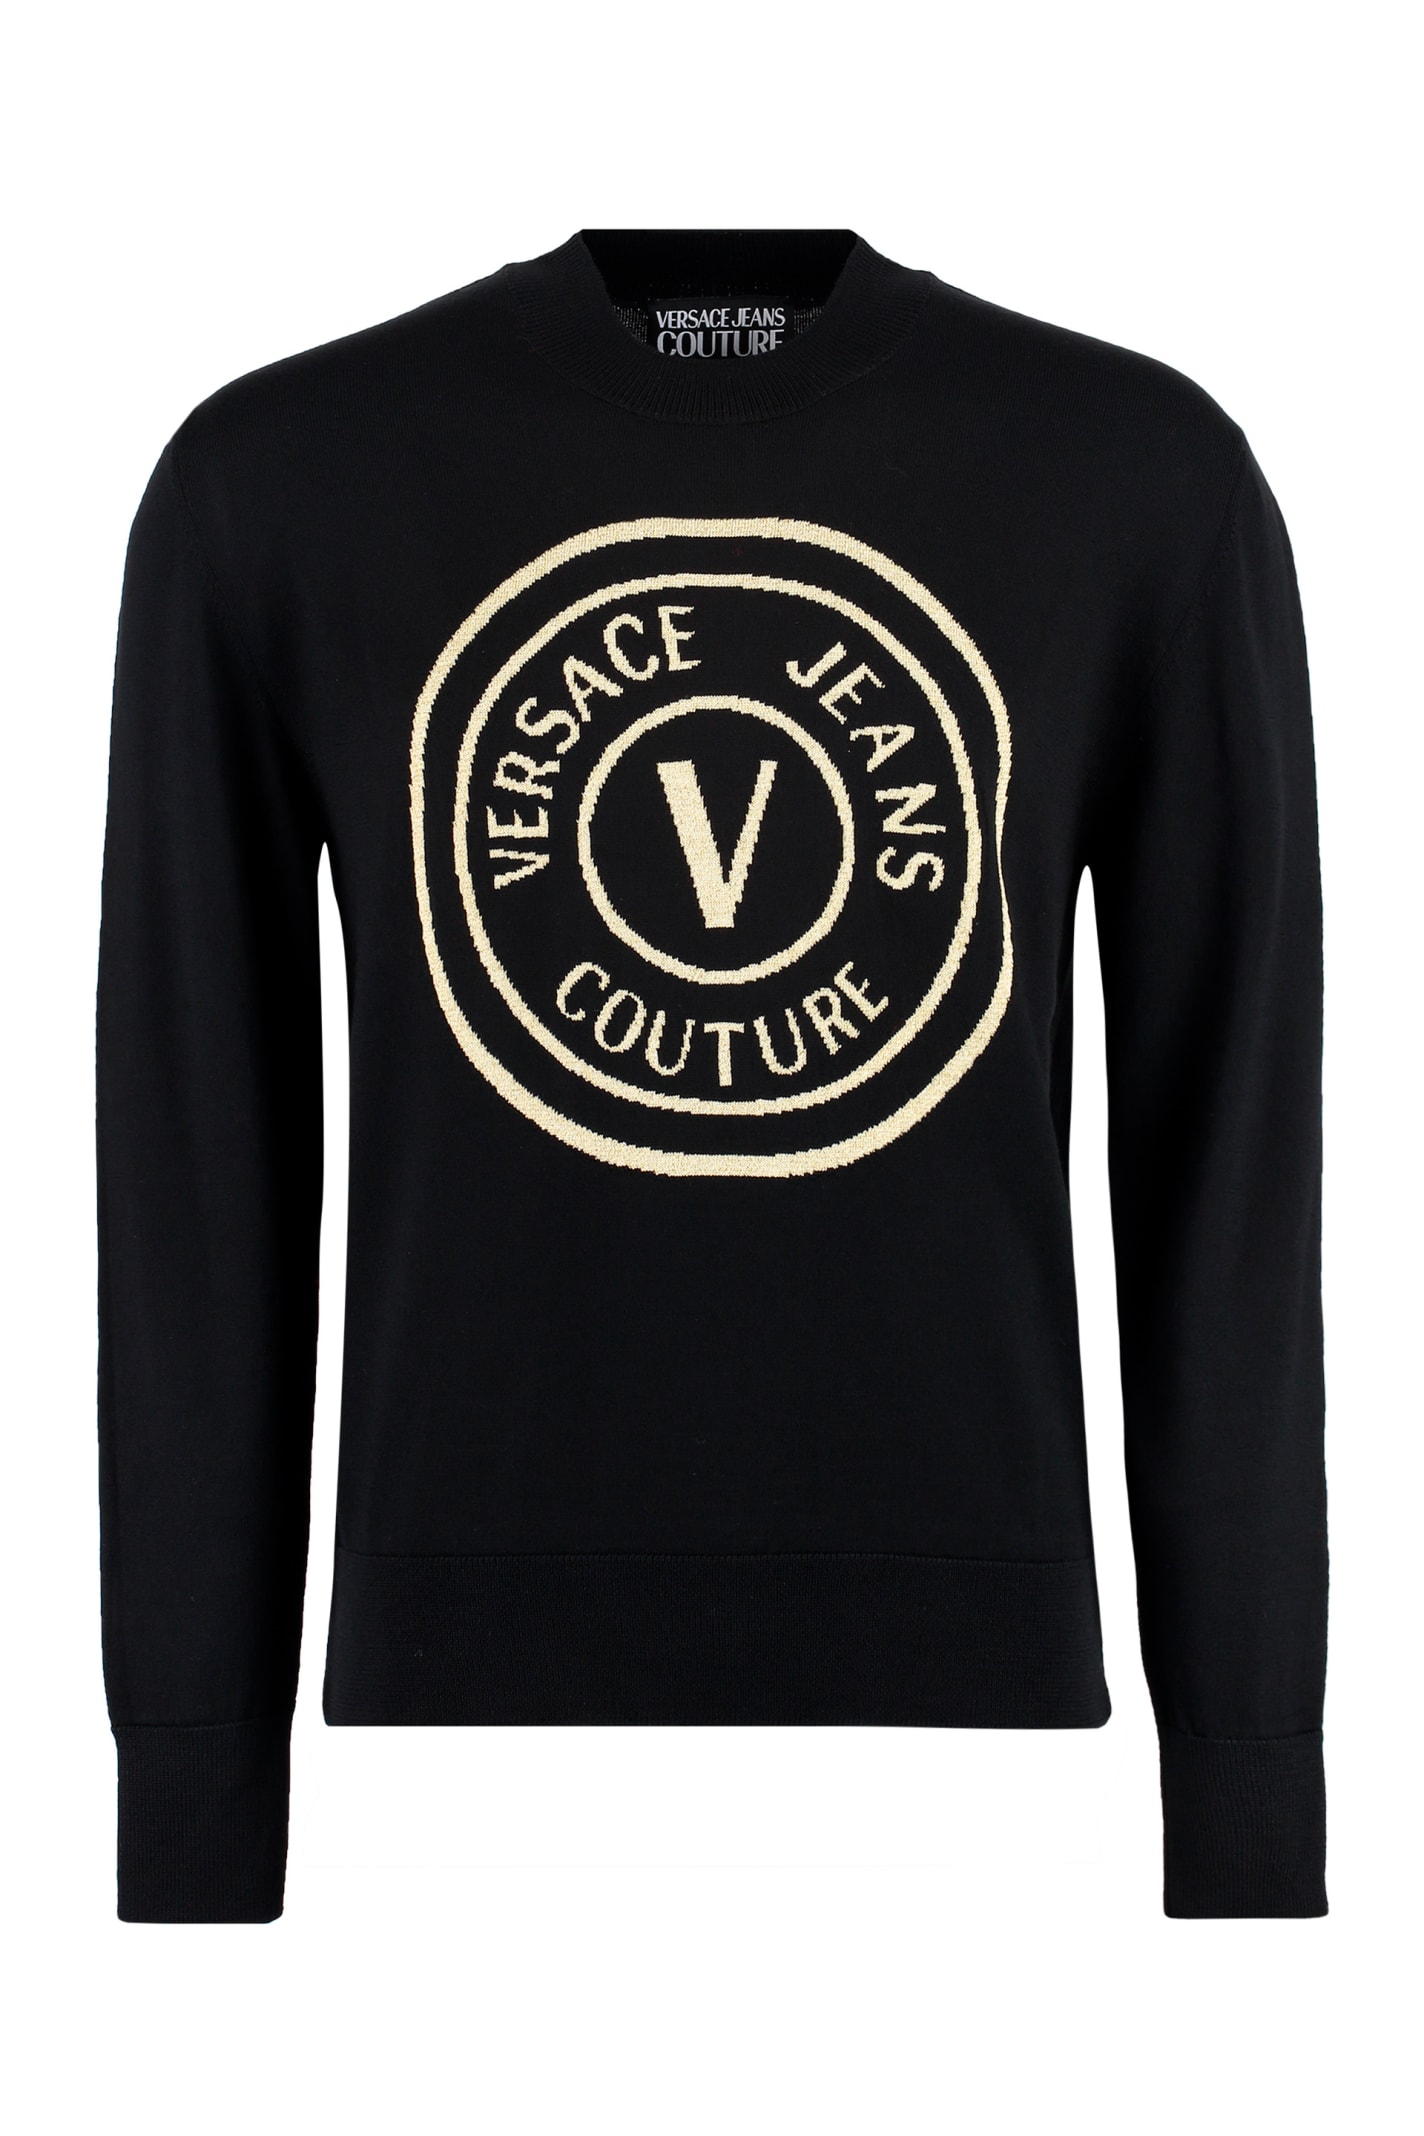 Versace Jeans Couture Intarsia Crew-neck Sweater